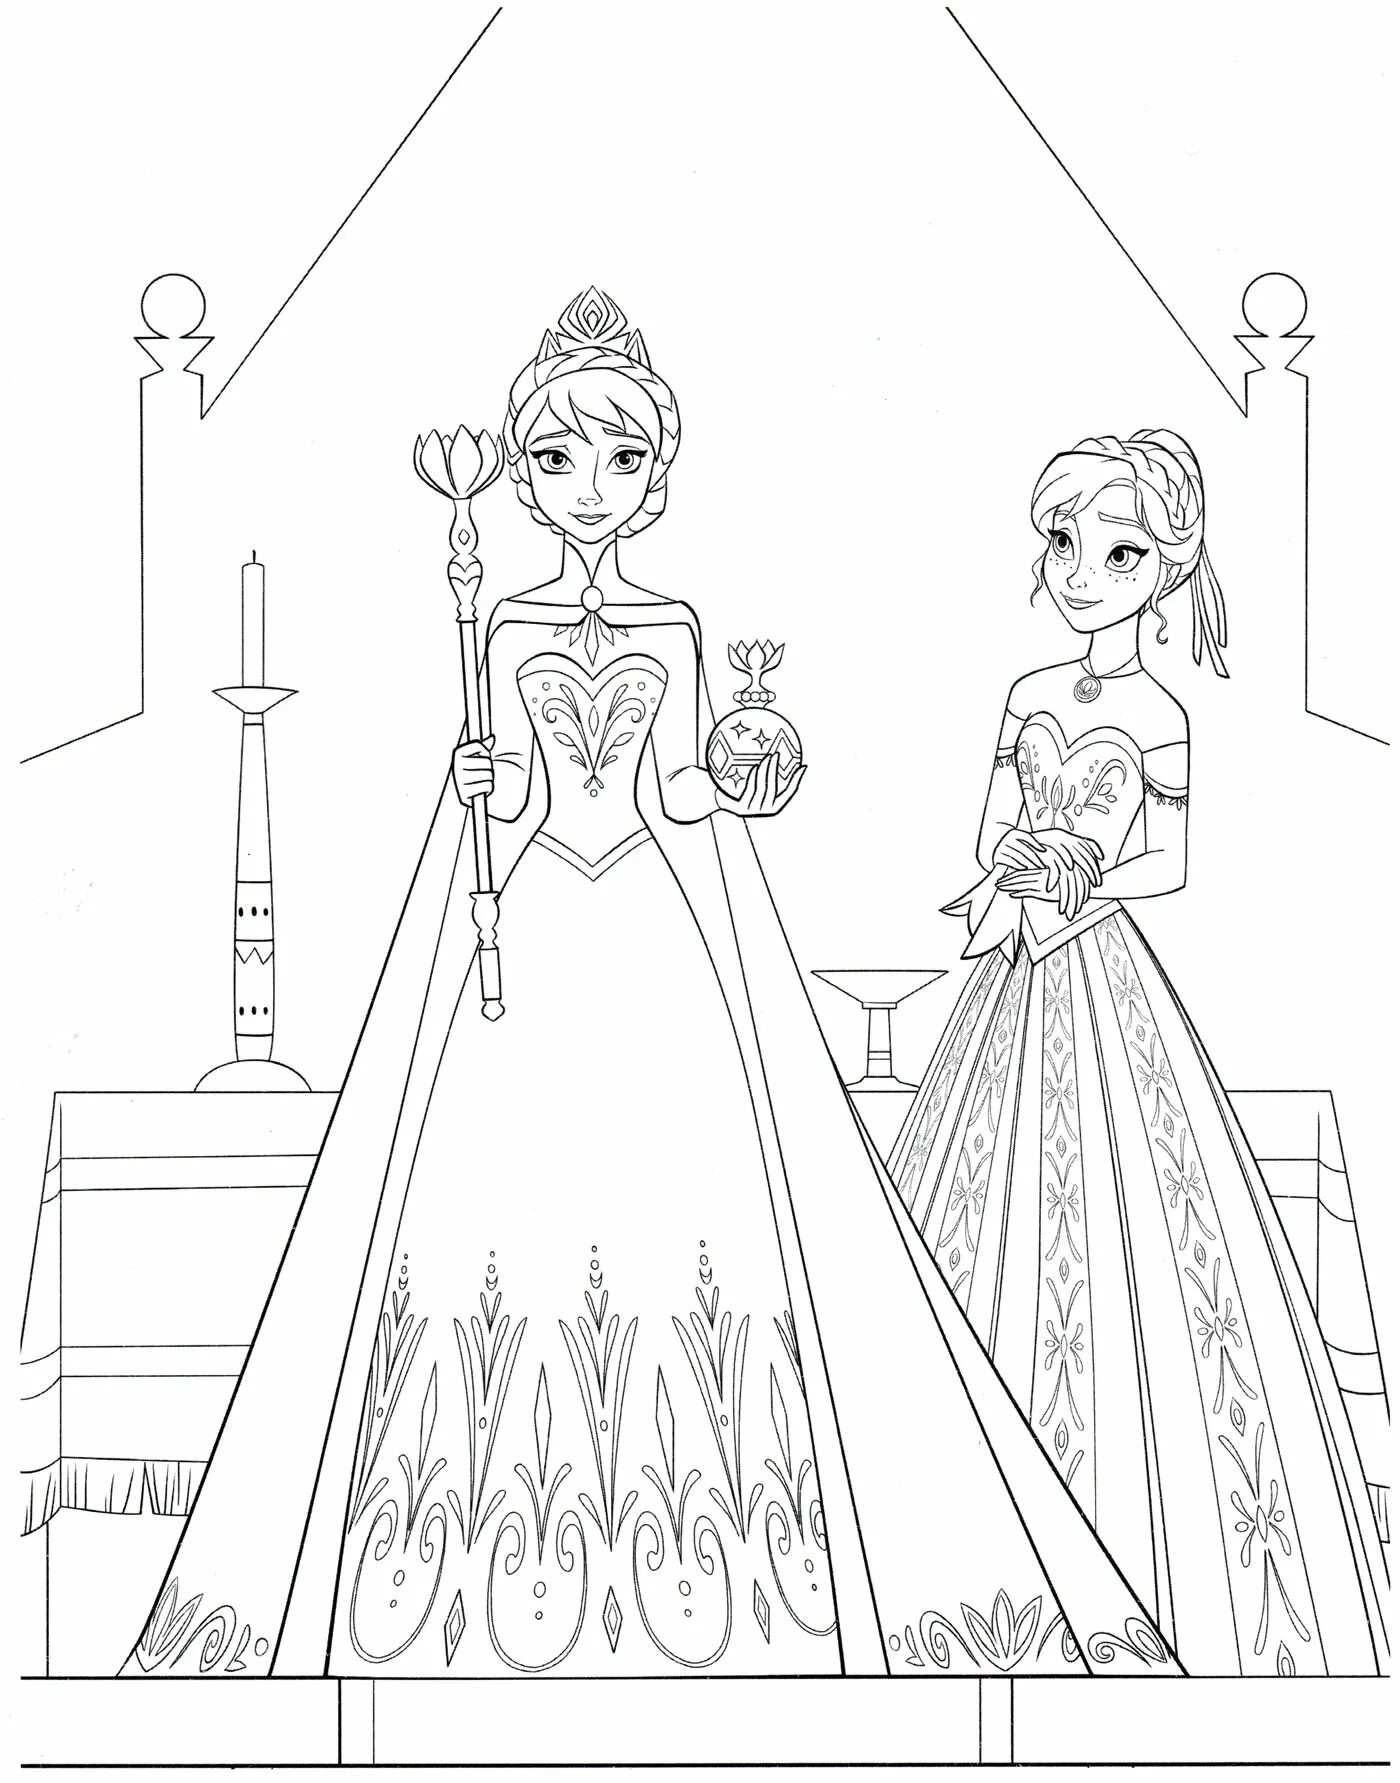 Elsa quirky coloring game for girls